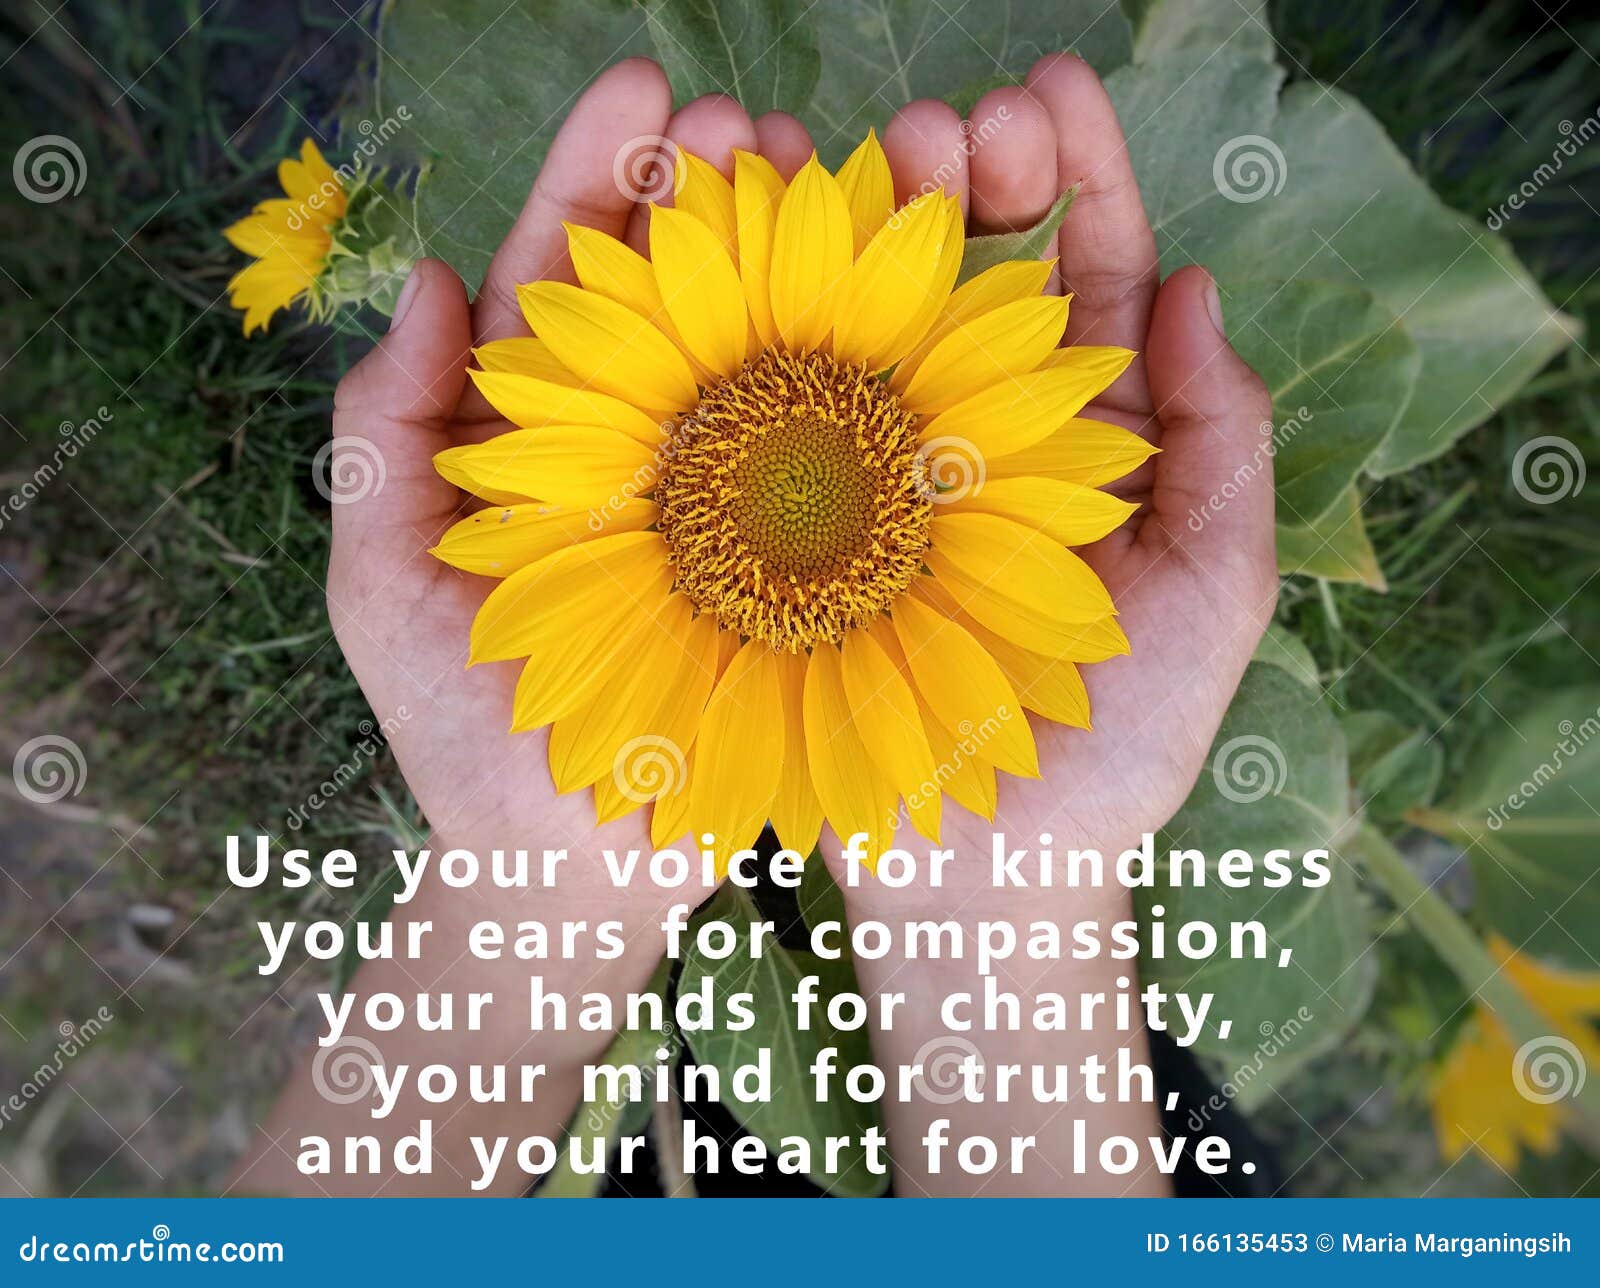 inspirational quote - use your voice for kindness, your ears for compassion, your hands for charity, your mind for truth.